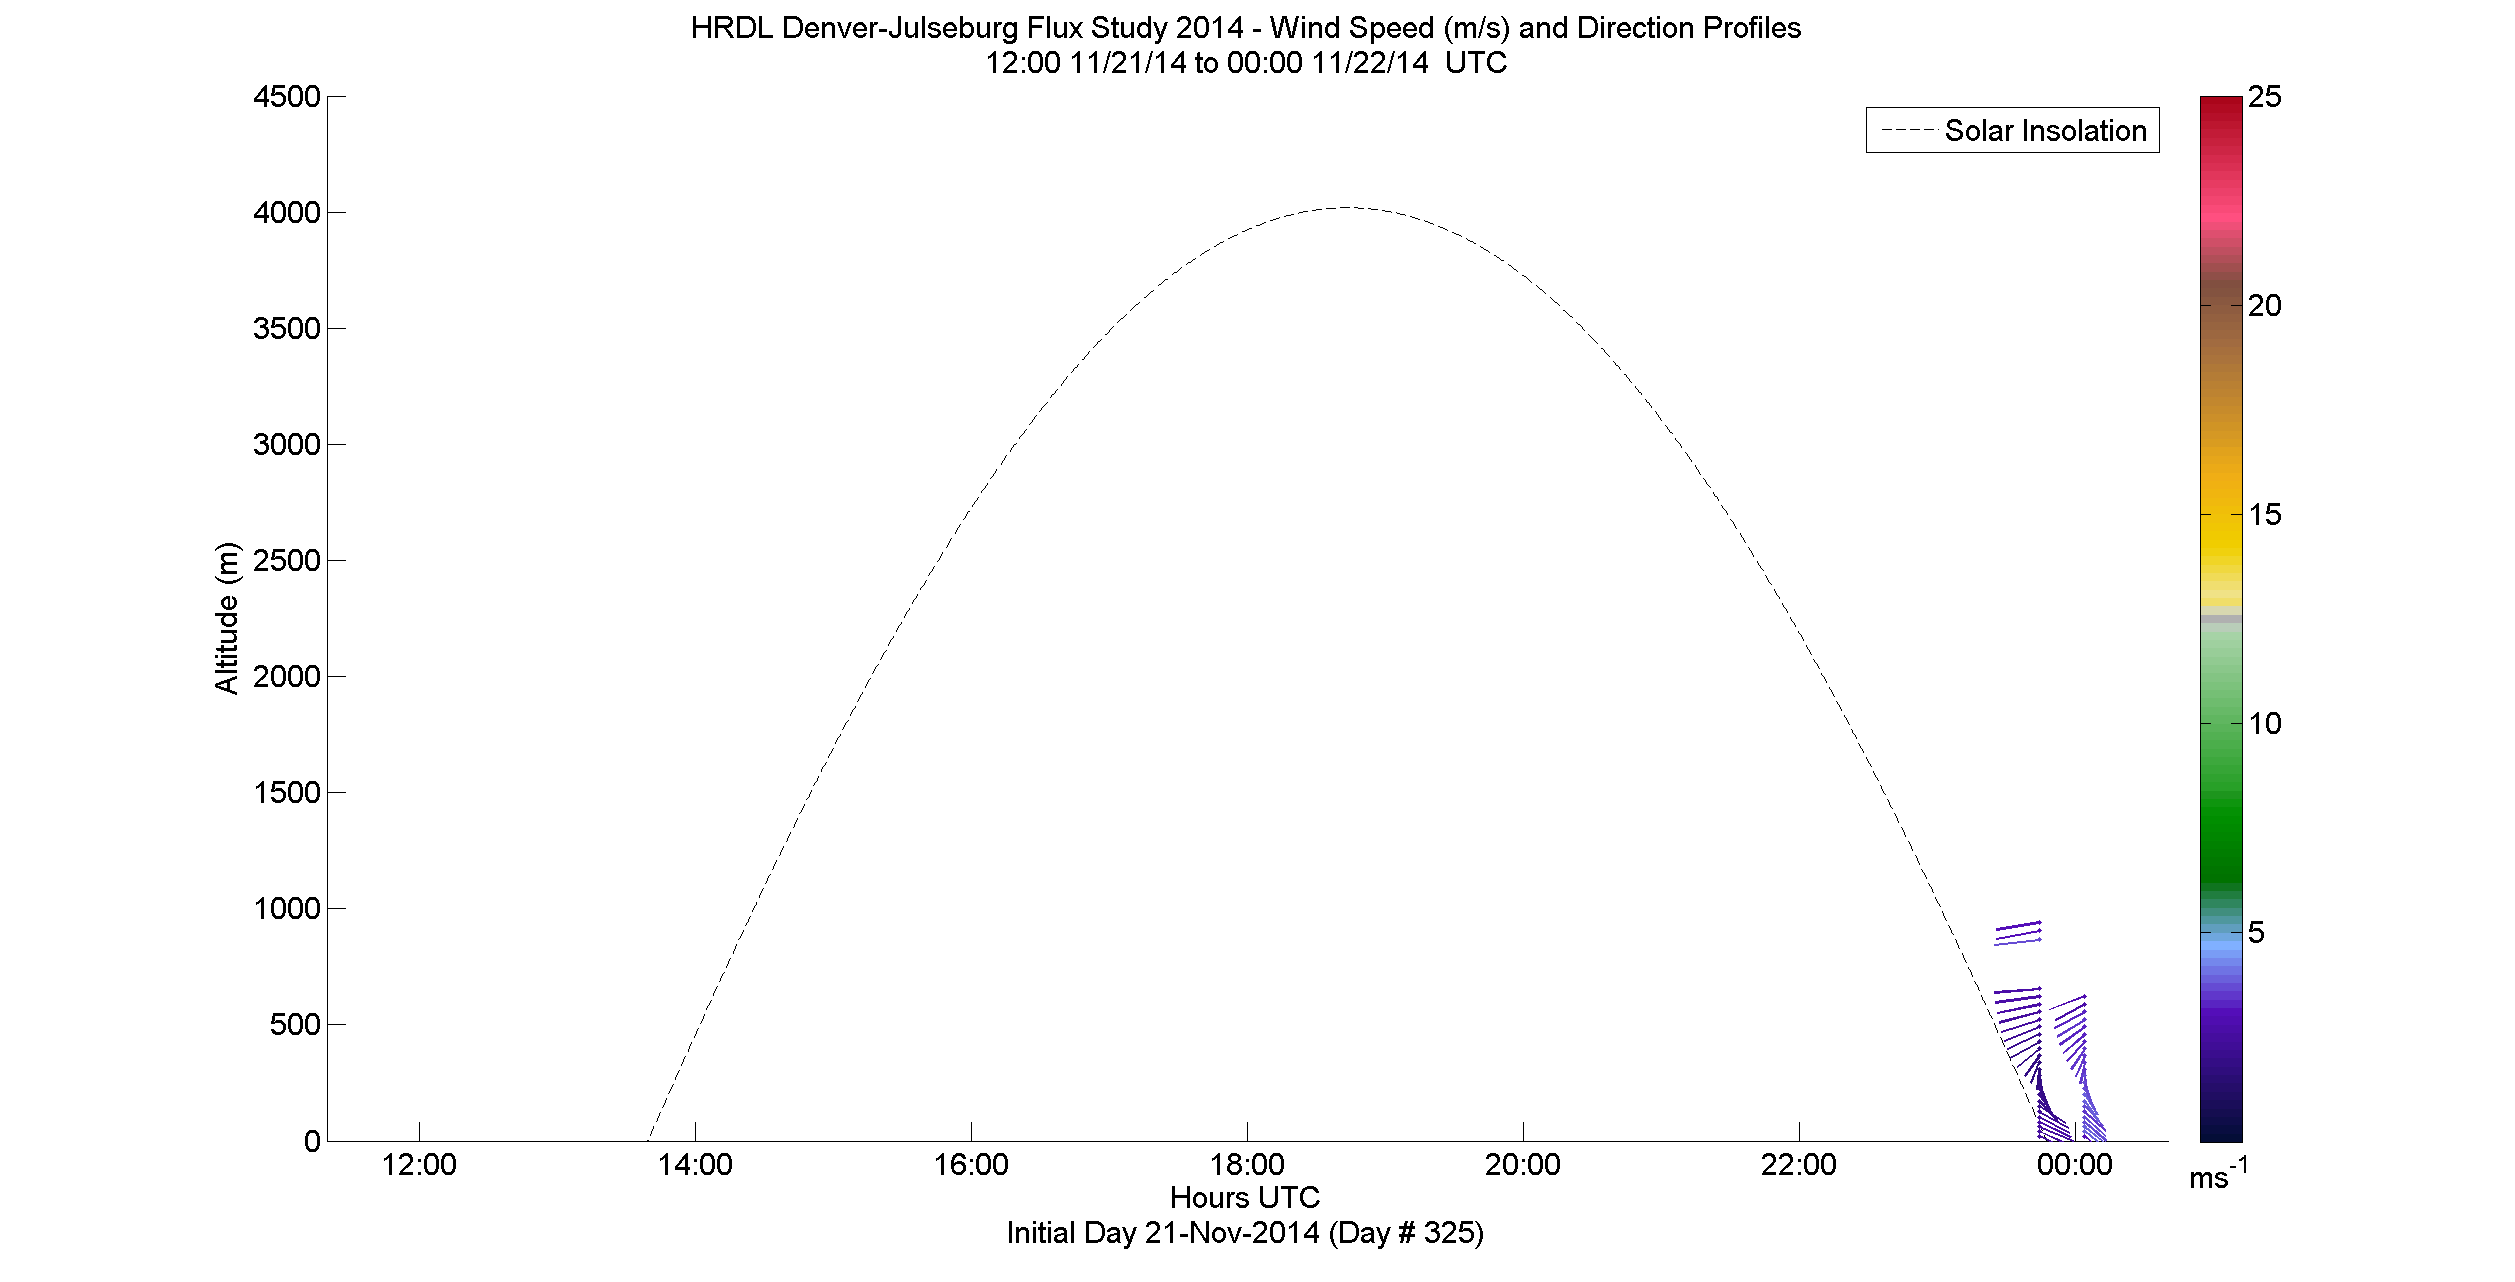 HRDL speed and direction profile - November 21 pm